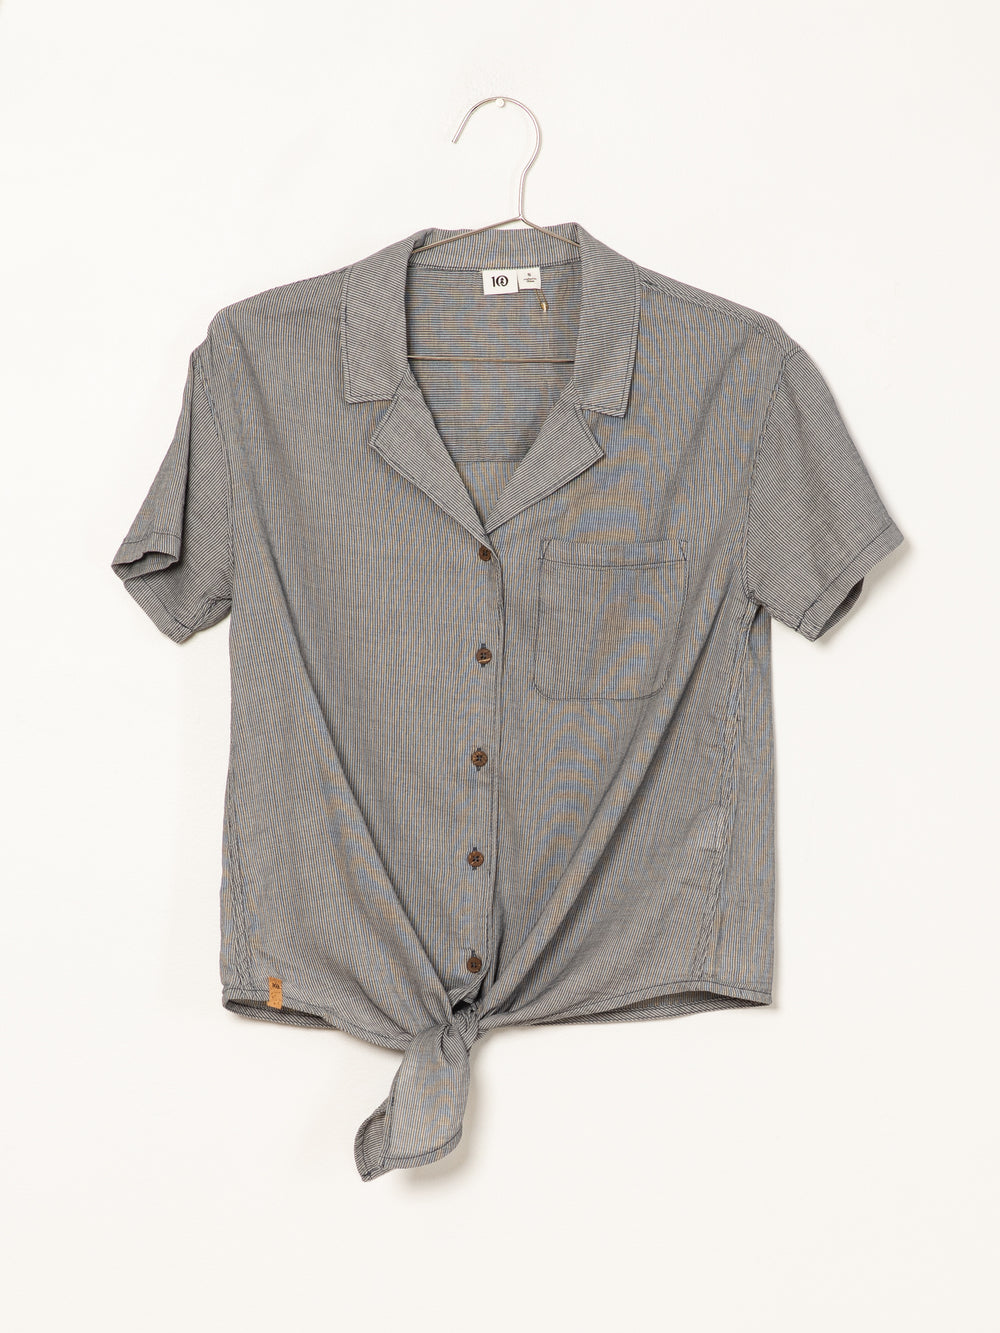 TENTREE ISA TIE FRONT SHORT SLEEVE SHIRT - CLEARANCE